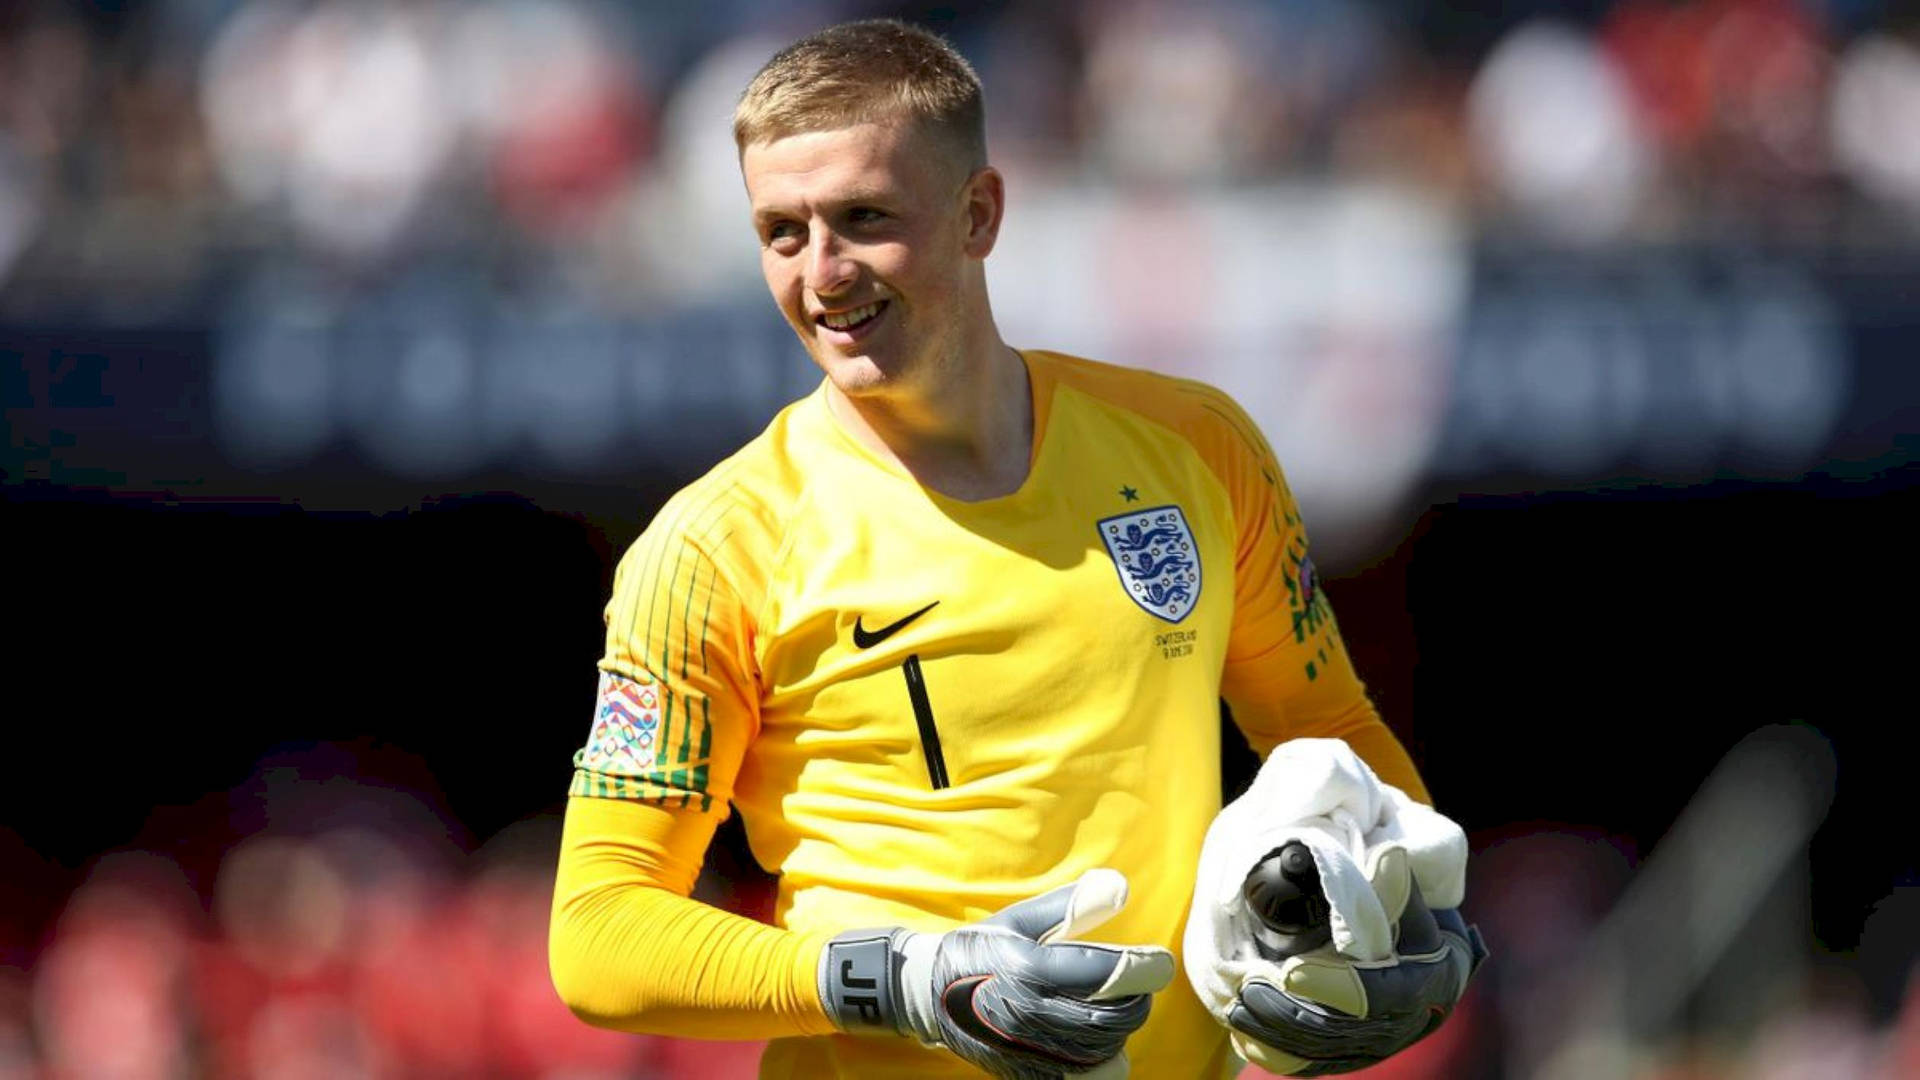 Jordanpickford Leende. (note: There Is Not Much Context Given For How This Sentence Relates To Computer Or Mobile Wallpaper, So I Have Simply Translated It As 